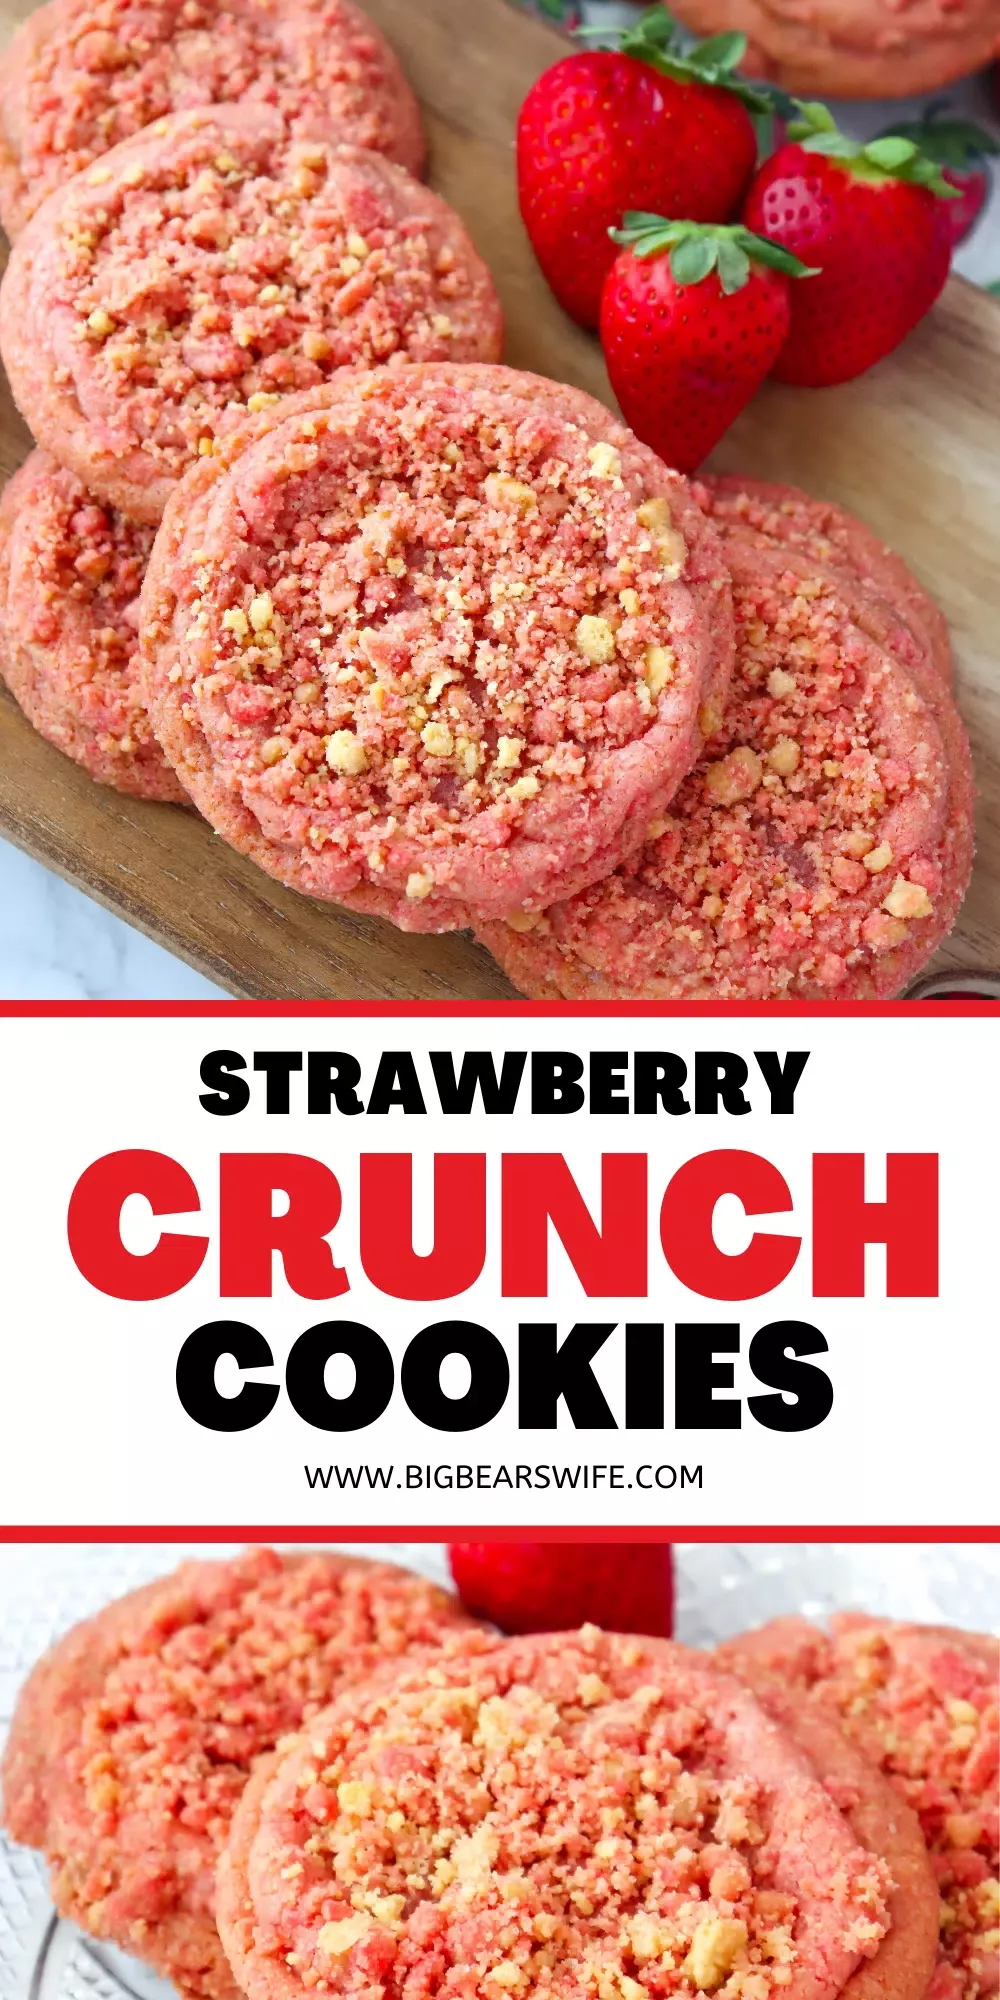 Strawberry Crunch Cookies